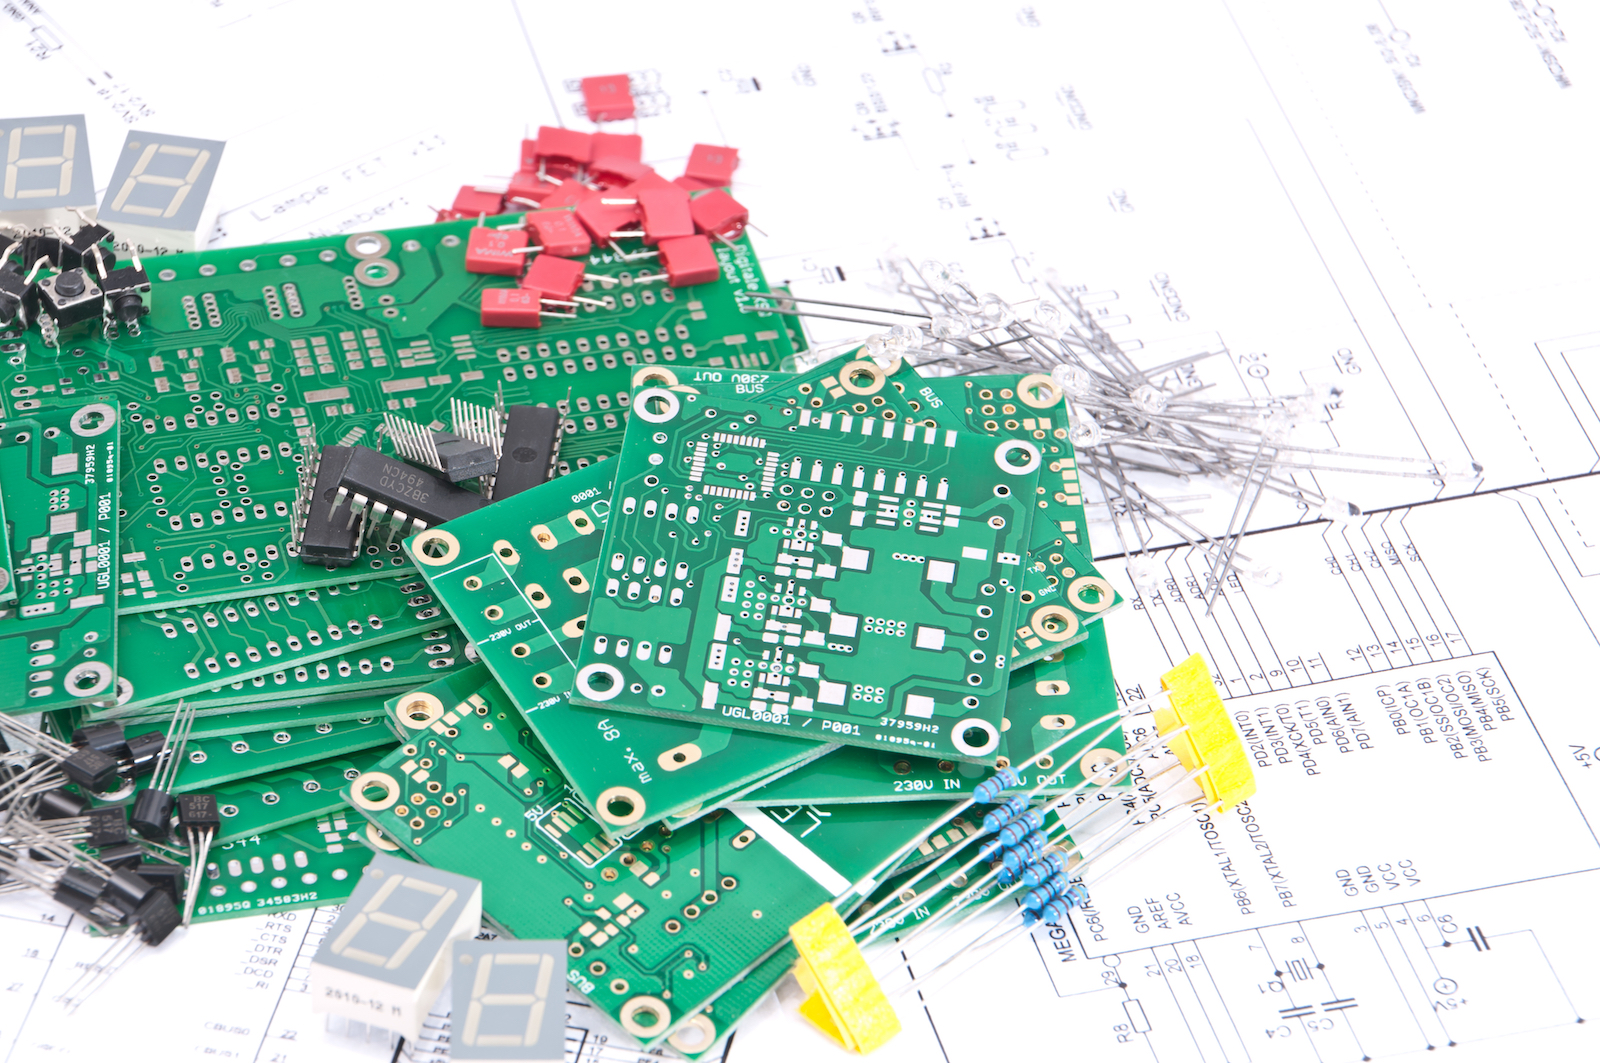 Manufacturing Electronic Components for High Risk of Failure Equipment